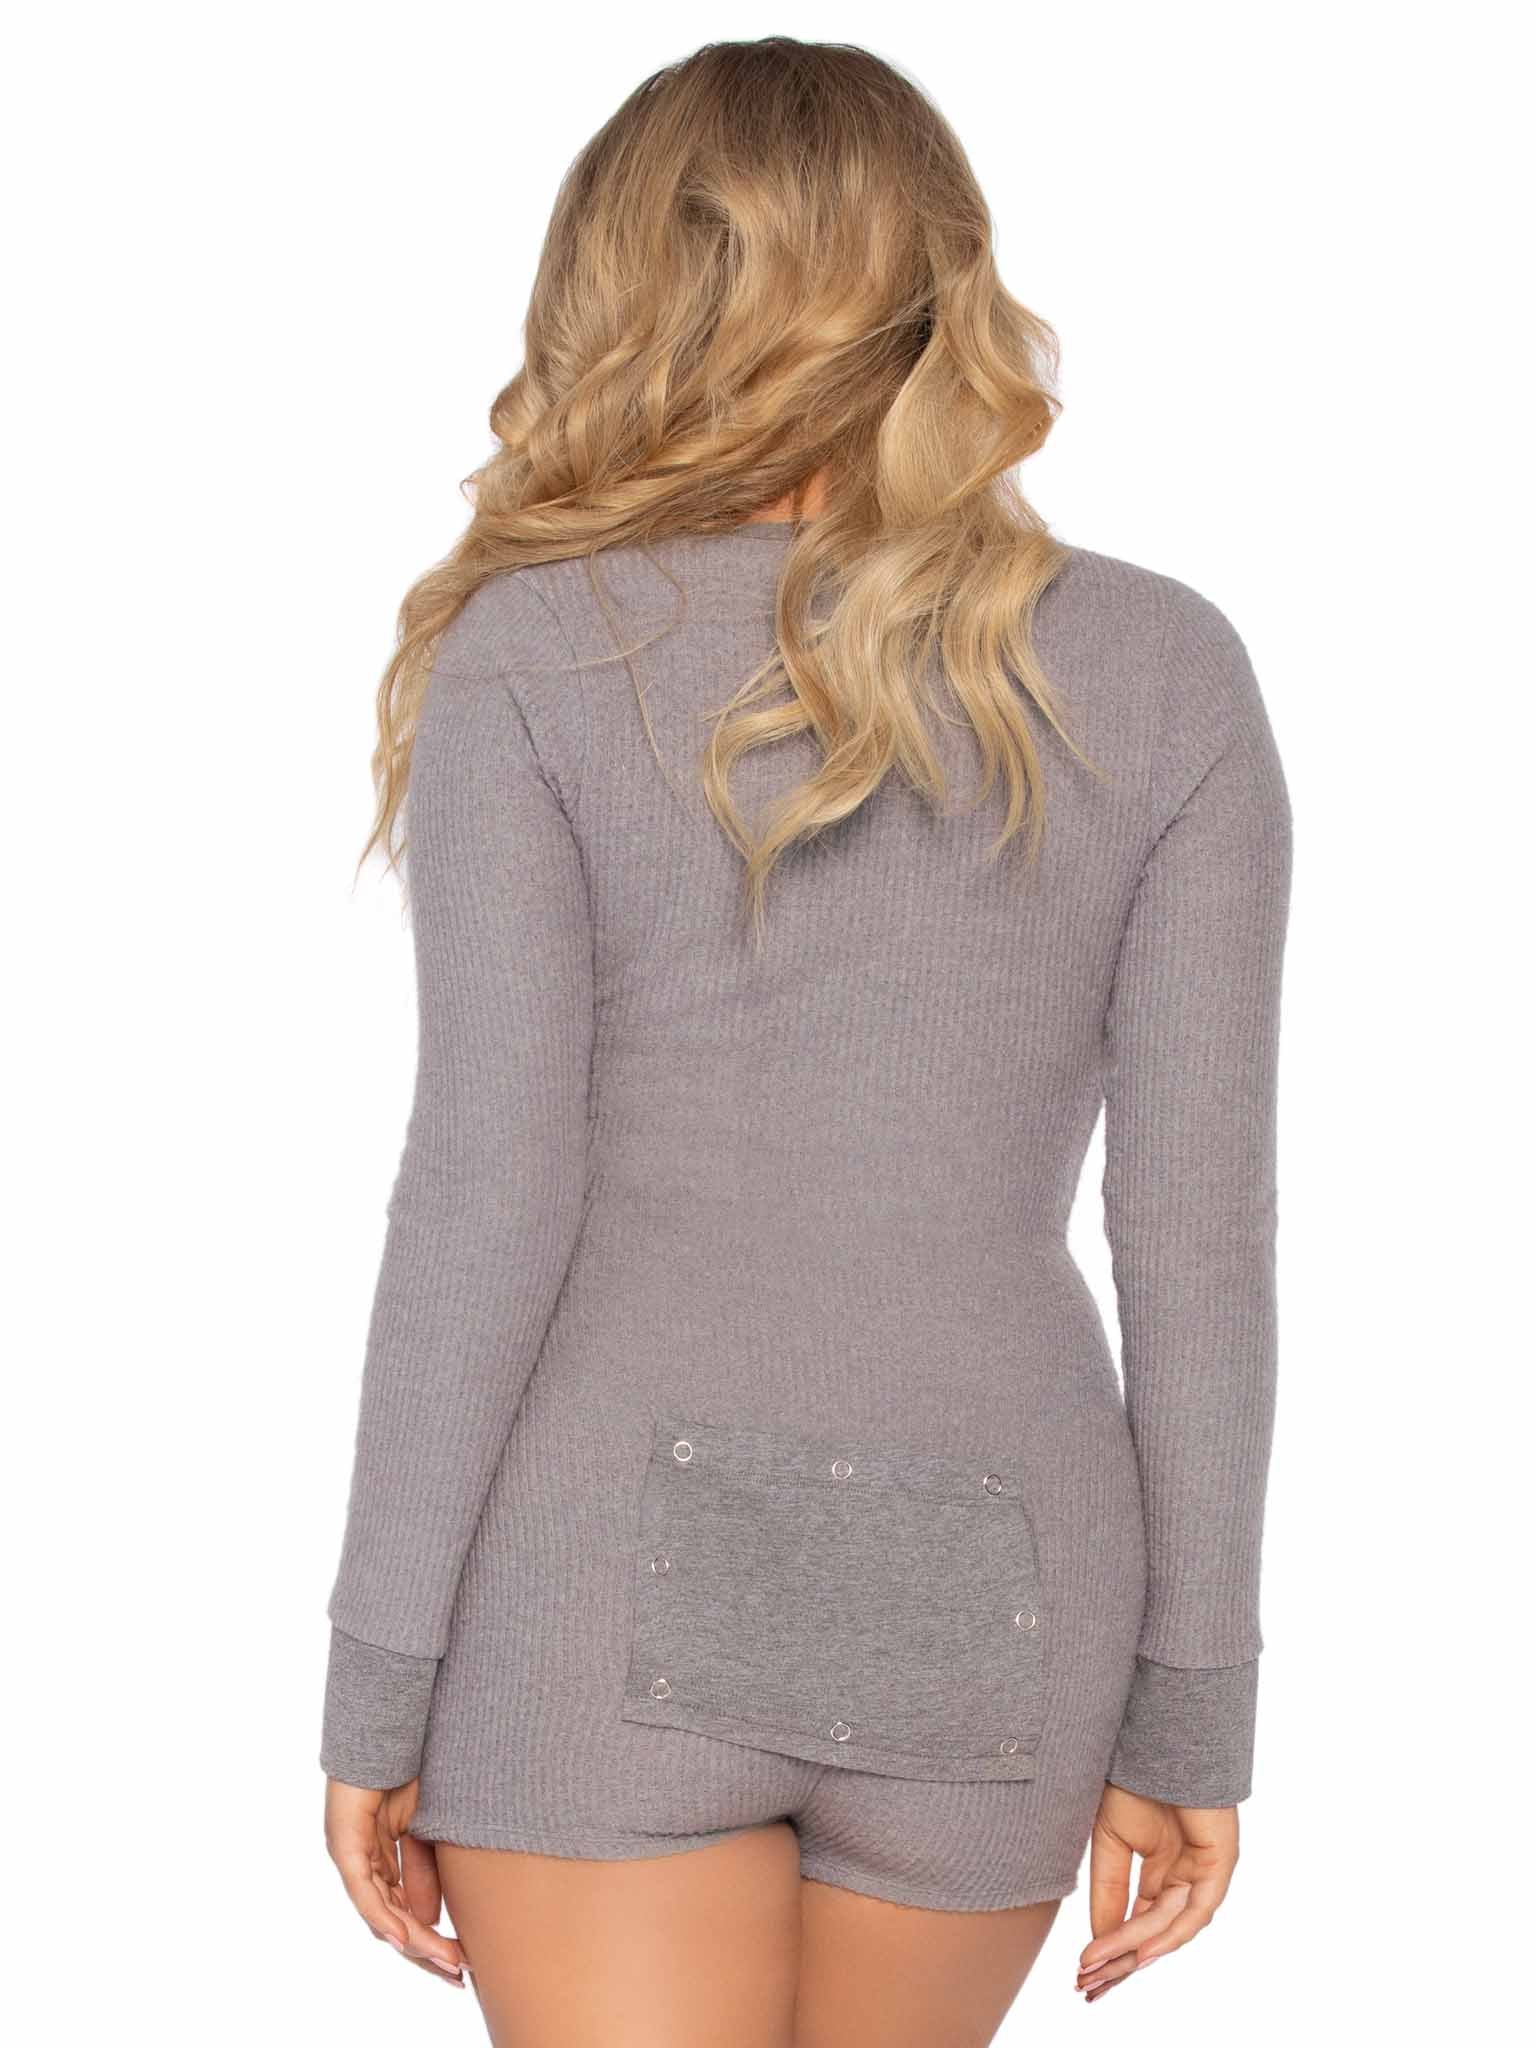 The grey Long Johns Romper, rear view.